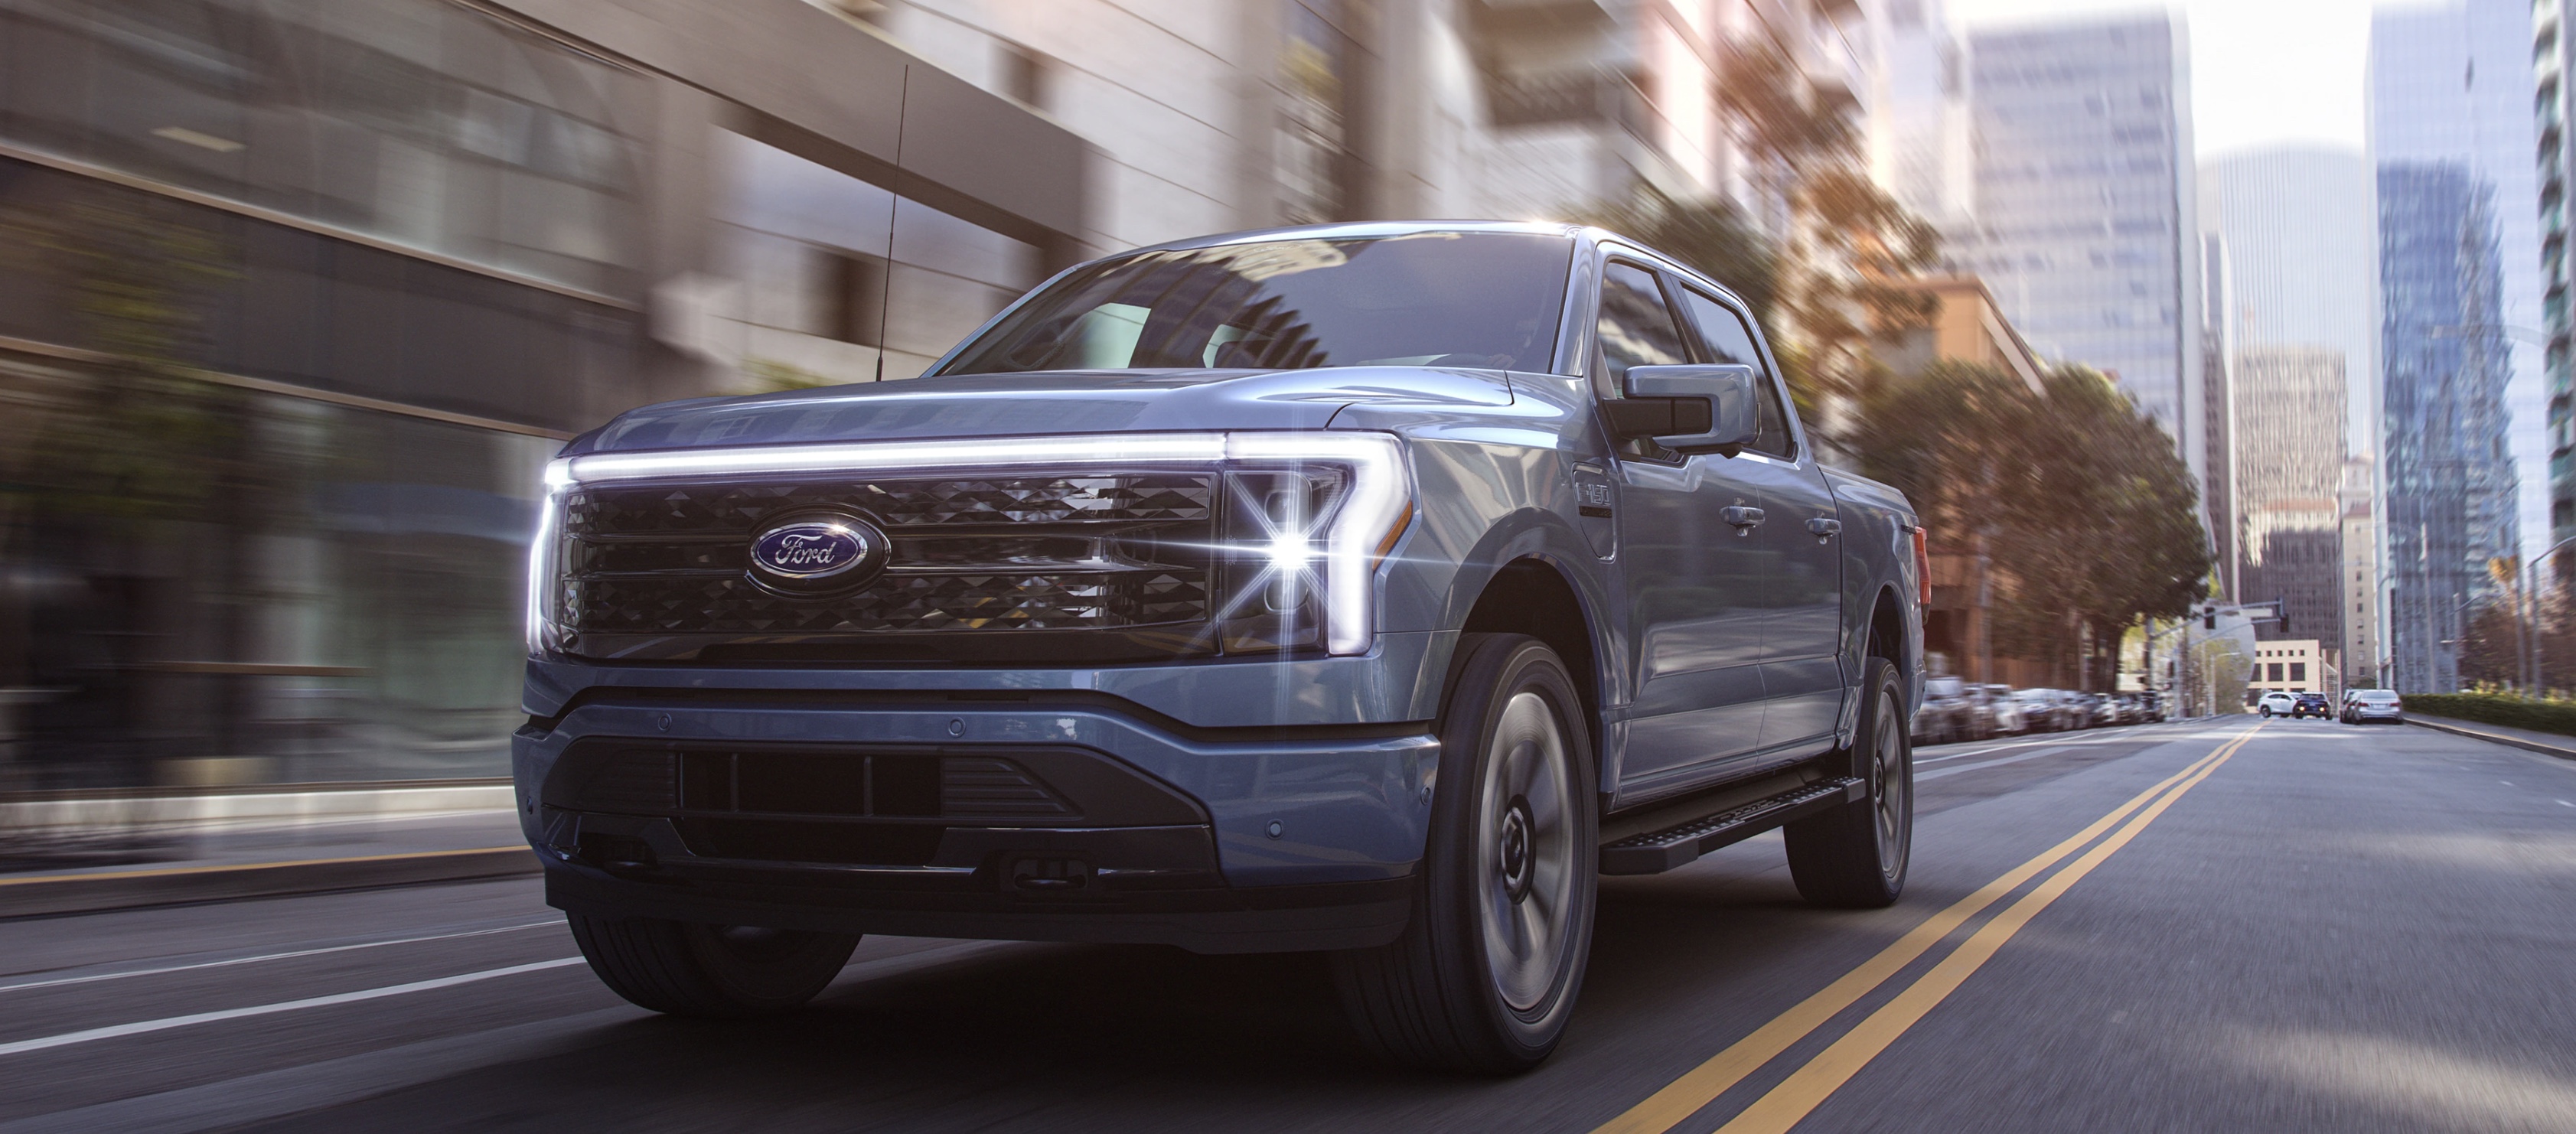 Ford says it now has nearly 200,000 reservations for F-150 Lightning, or 3  years of backlog | Electrek